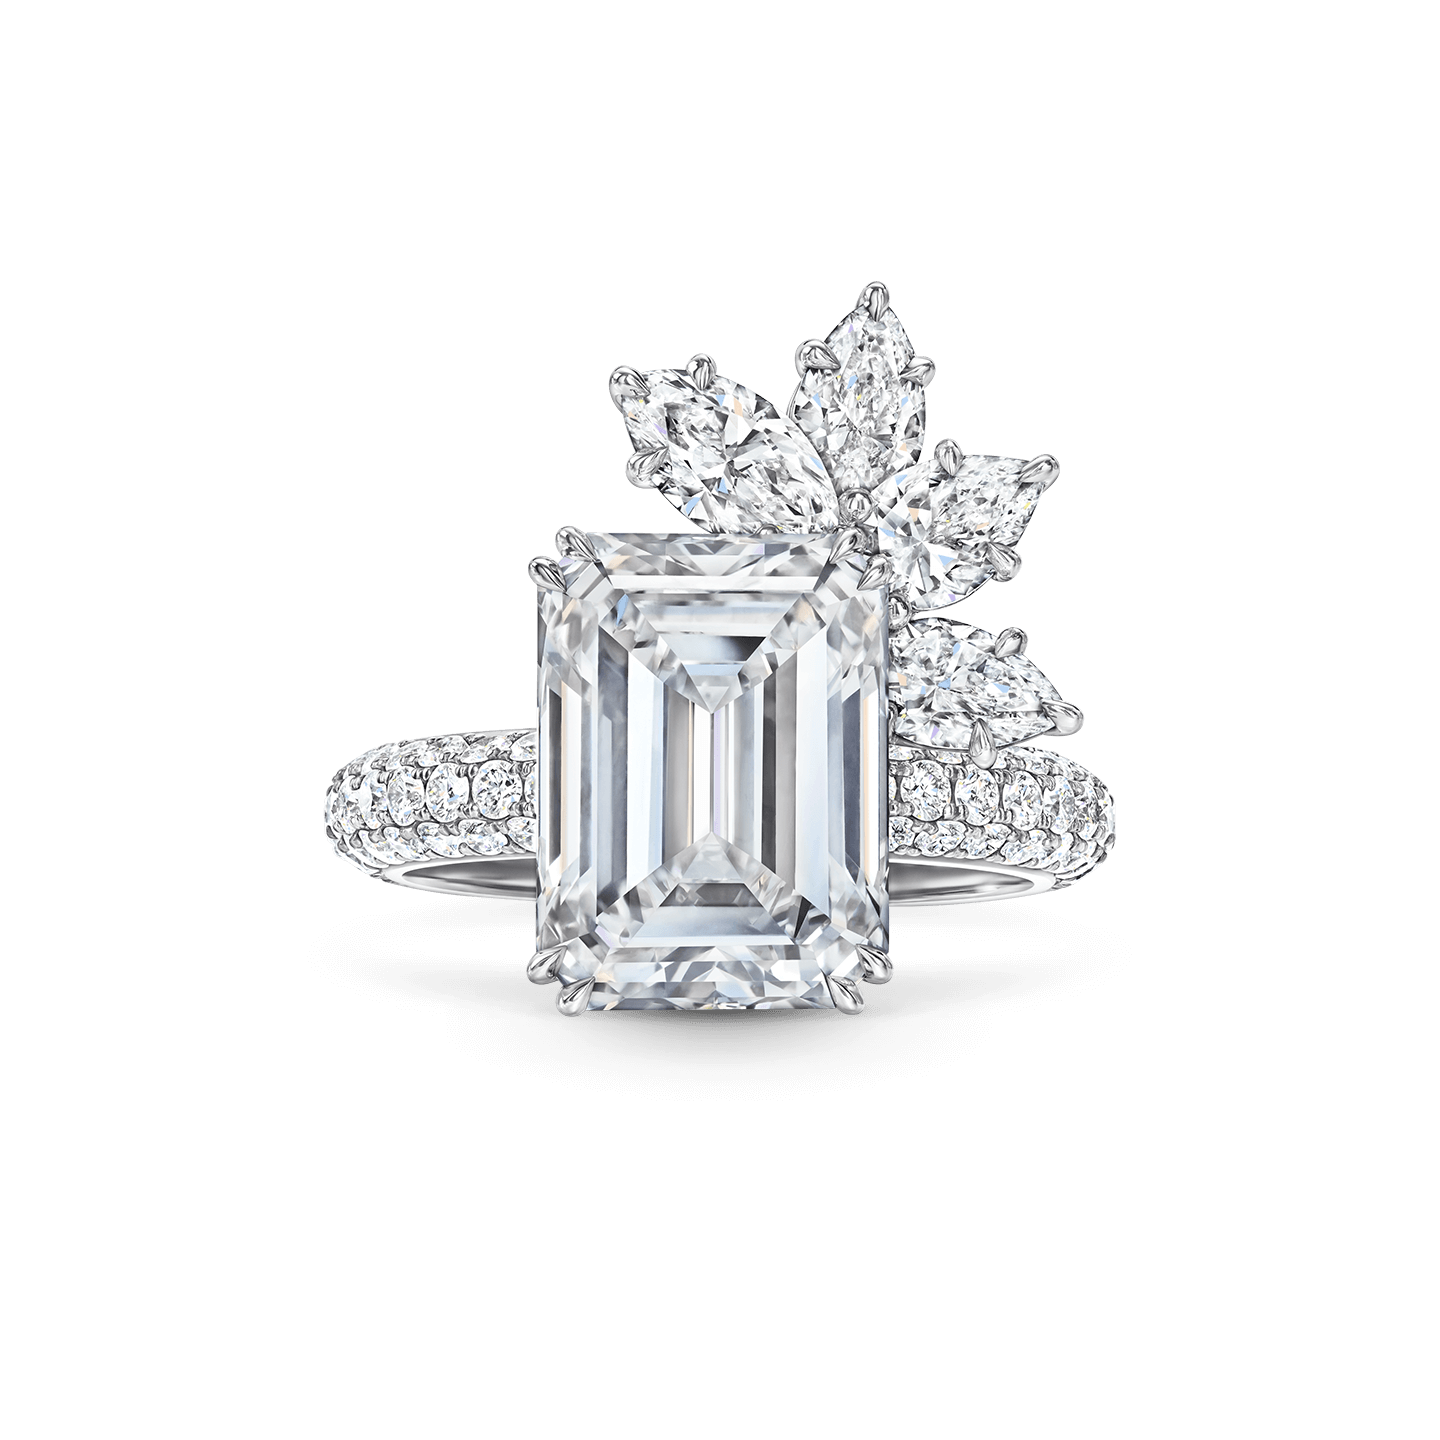 Bridal Couture Emerald-Cut Diamond Engagement Ring